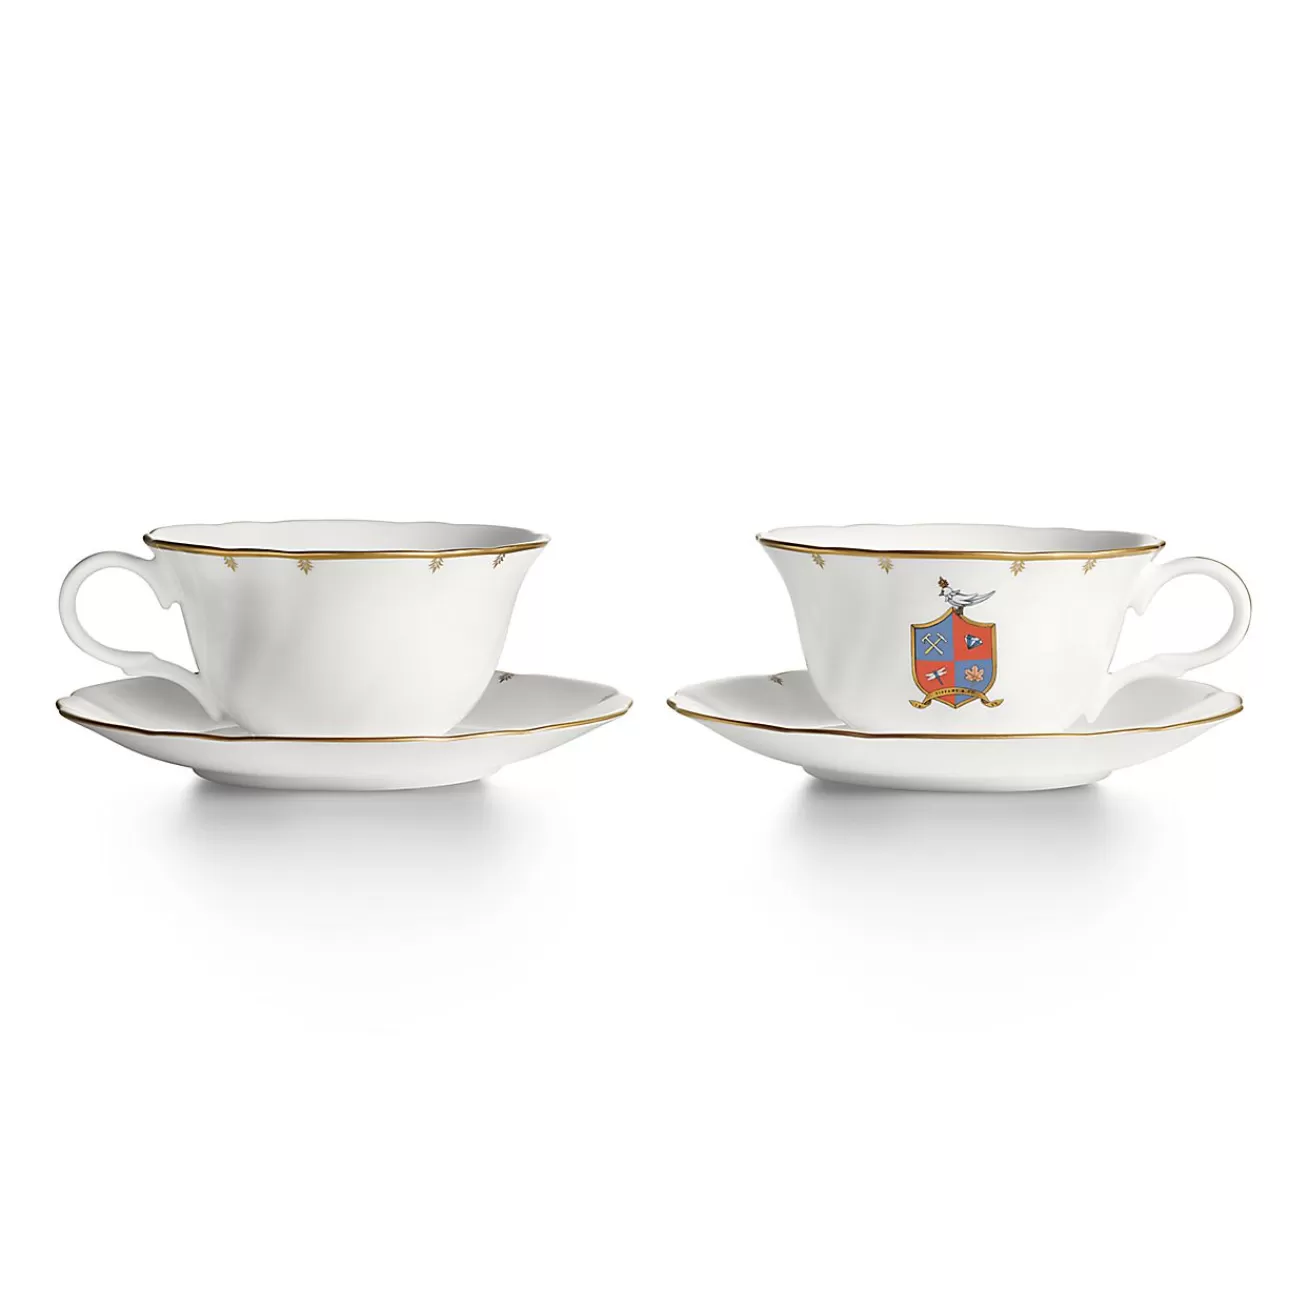 Tiffany & Co. Tiffany Crest Teacups Set of Two, in Bone China | ^ The Couple | Tableware